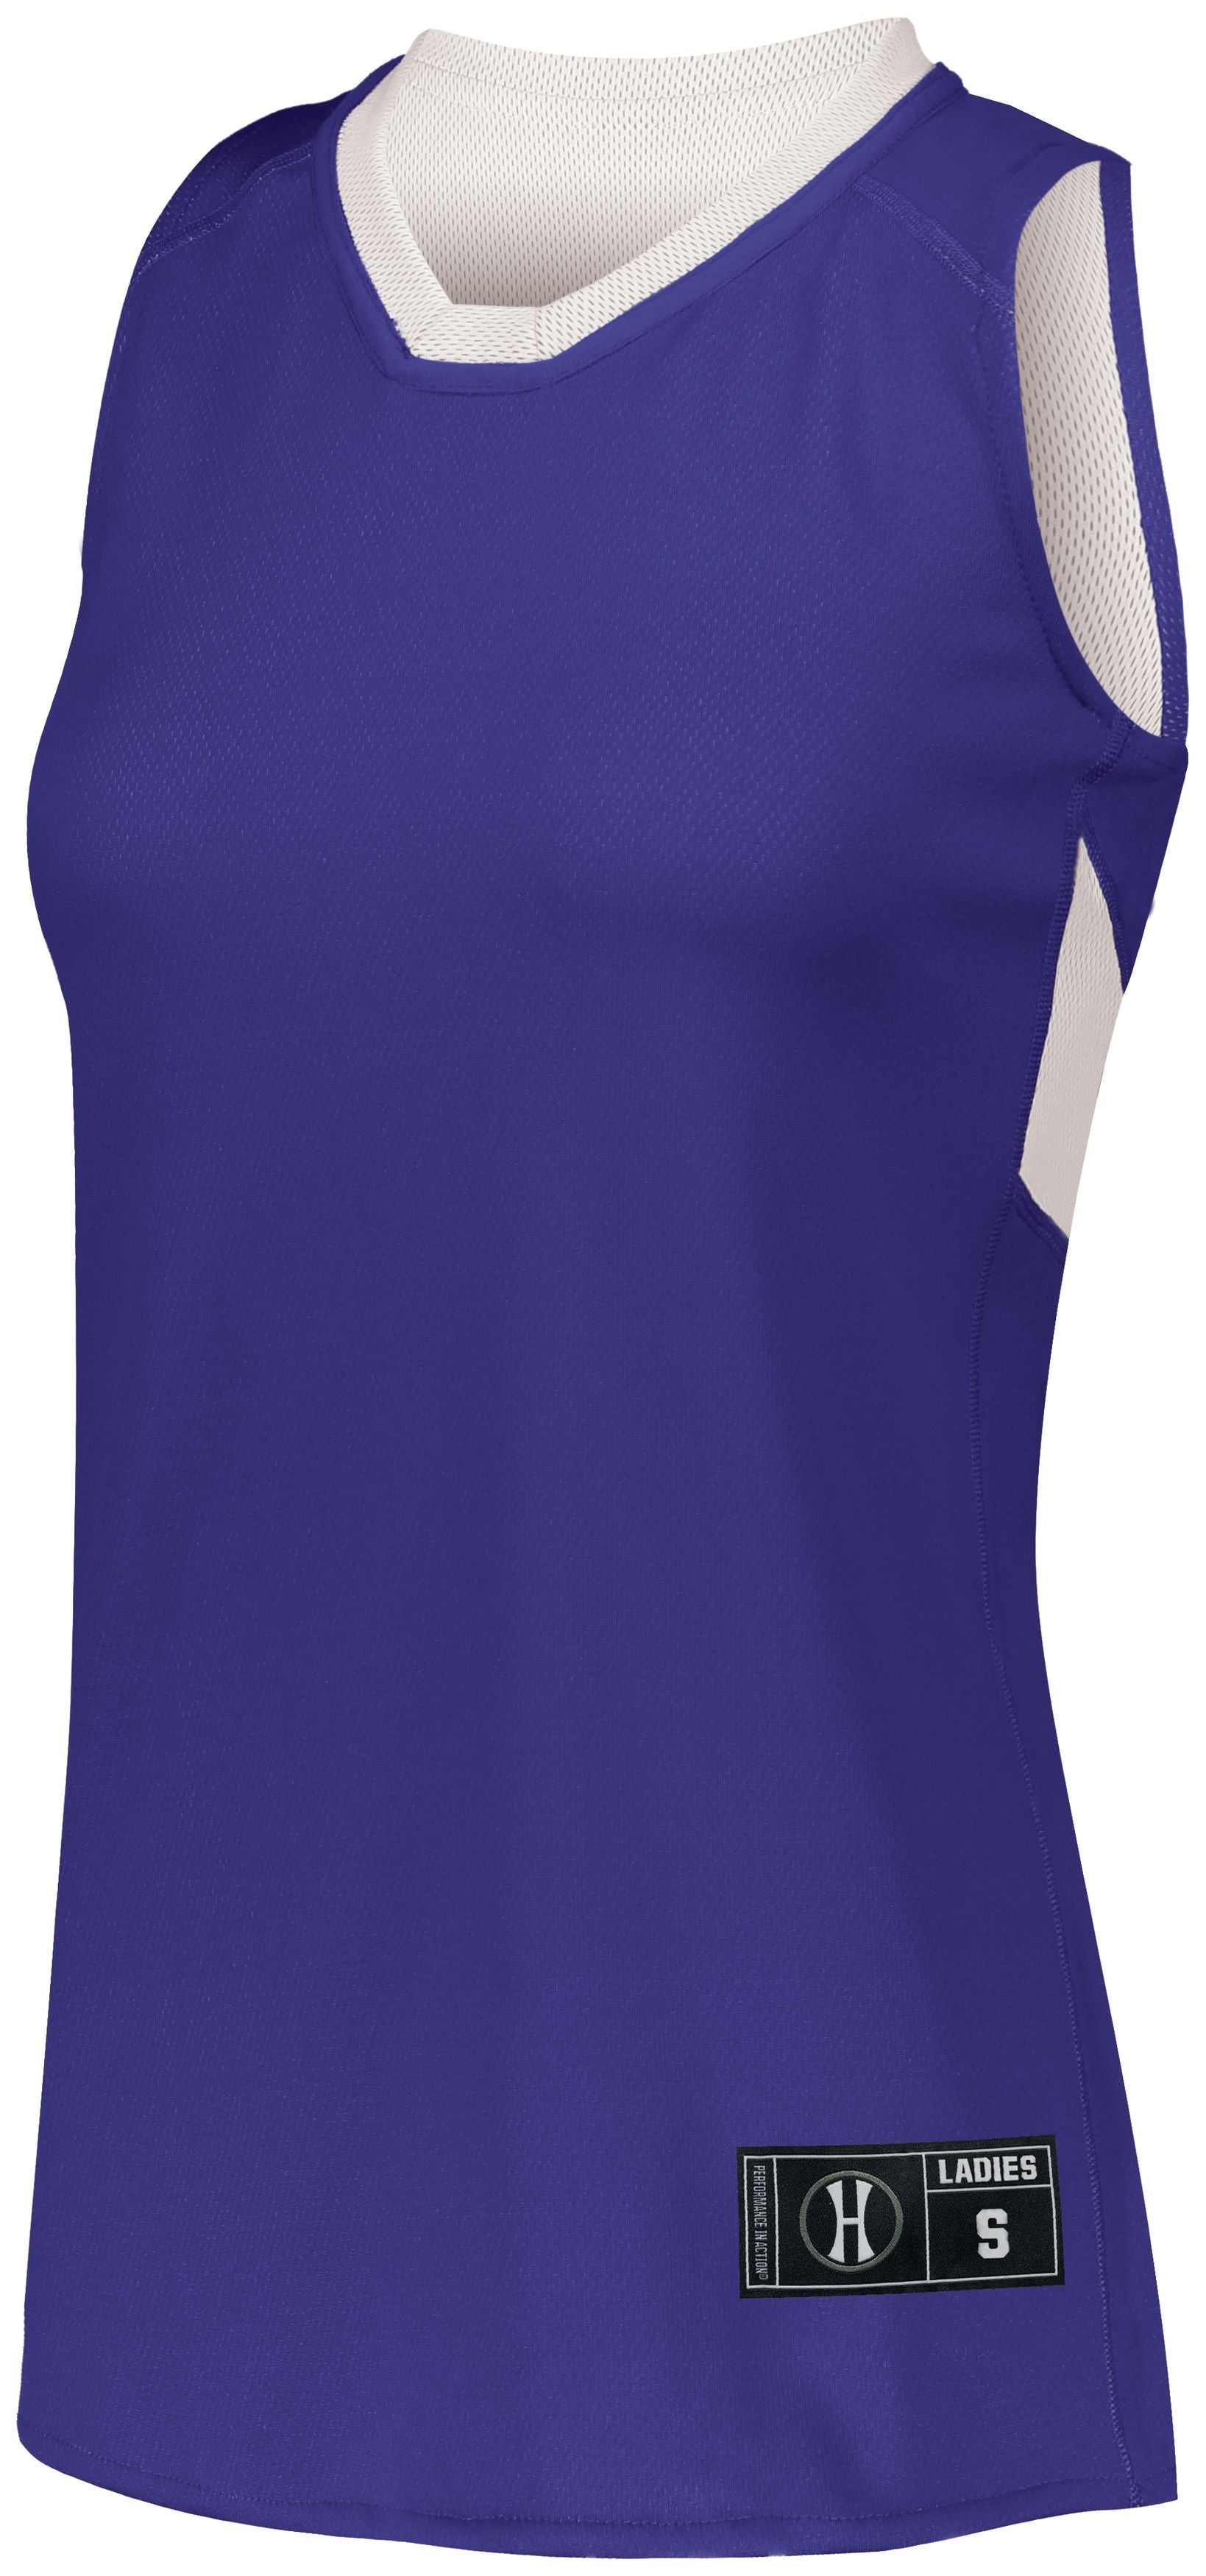 Holloway Ladies Dual-Side Single Ply Basketball Jersey in Purple/White  -Part of the Ladies, Ladies-Jersey, Basketball, Holloway, Shirts, All-Sports, All-Sports-1 product lines at KanaleyCreations.com